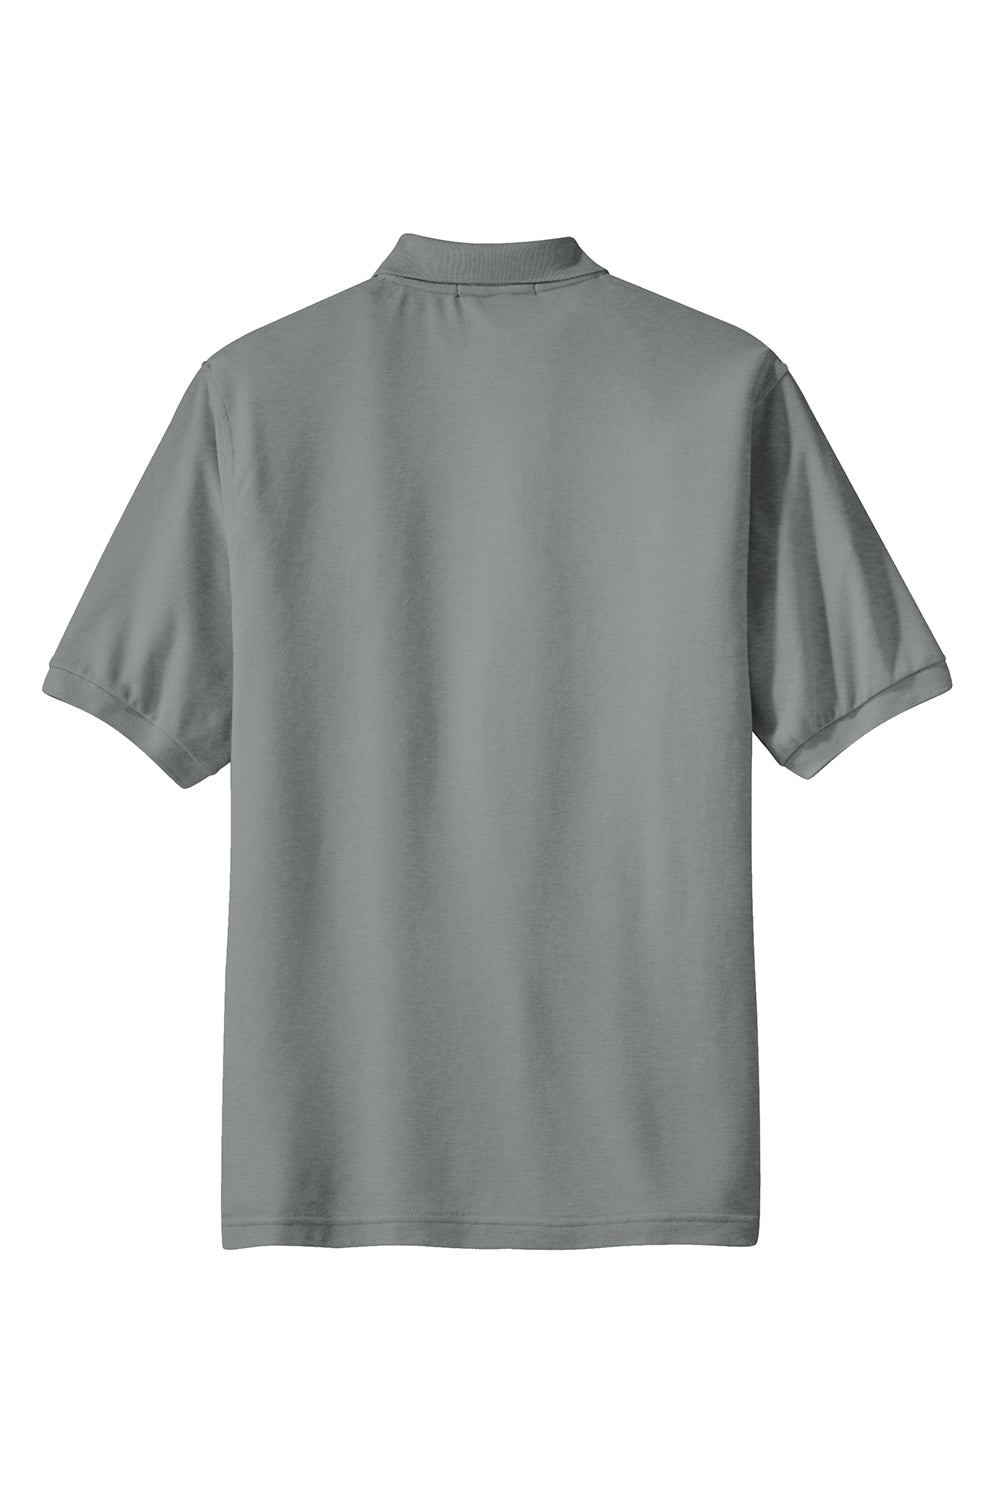 Port Authority K500P Mens Silk Touch Wrinkle Resistant Short Sleeve Polo Shirt w/ Pocket Cool Grey Flat Back